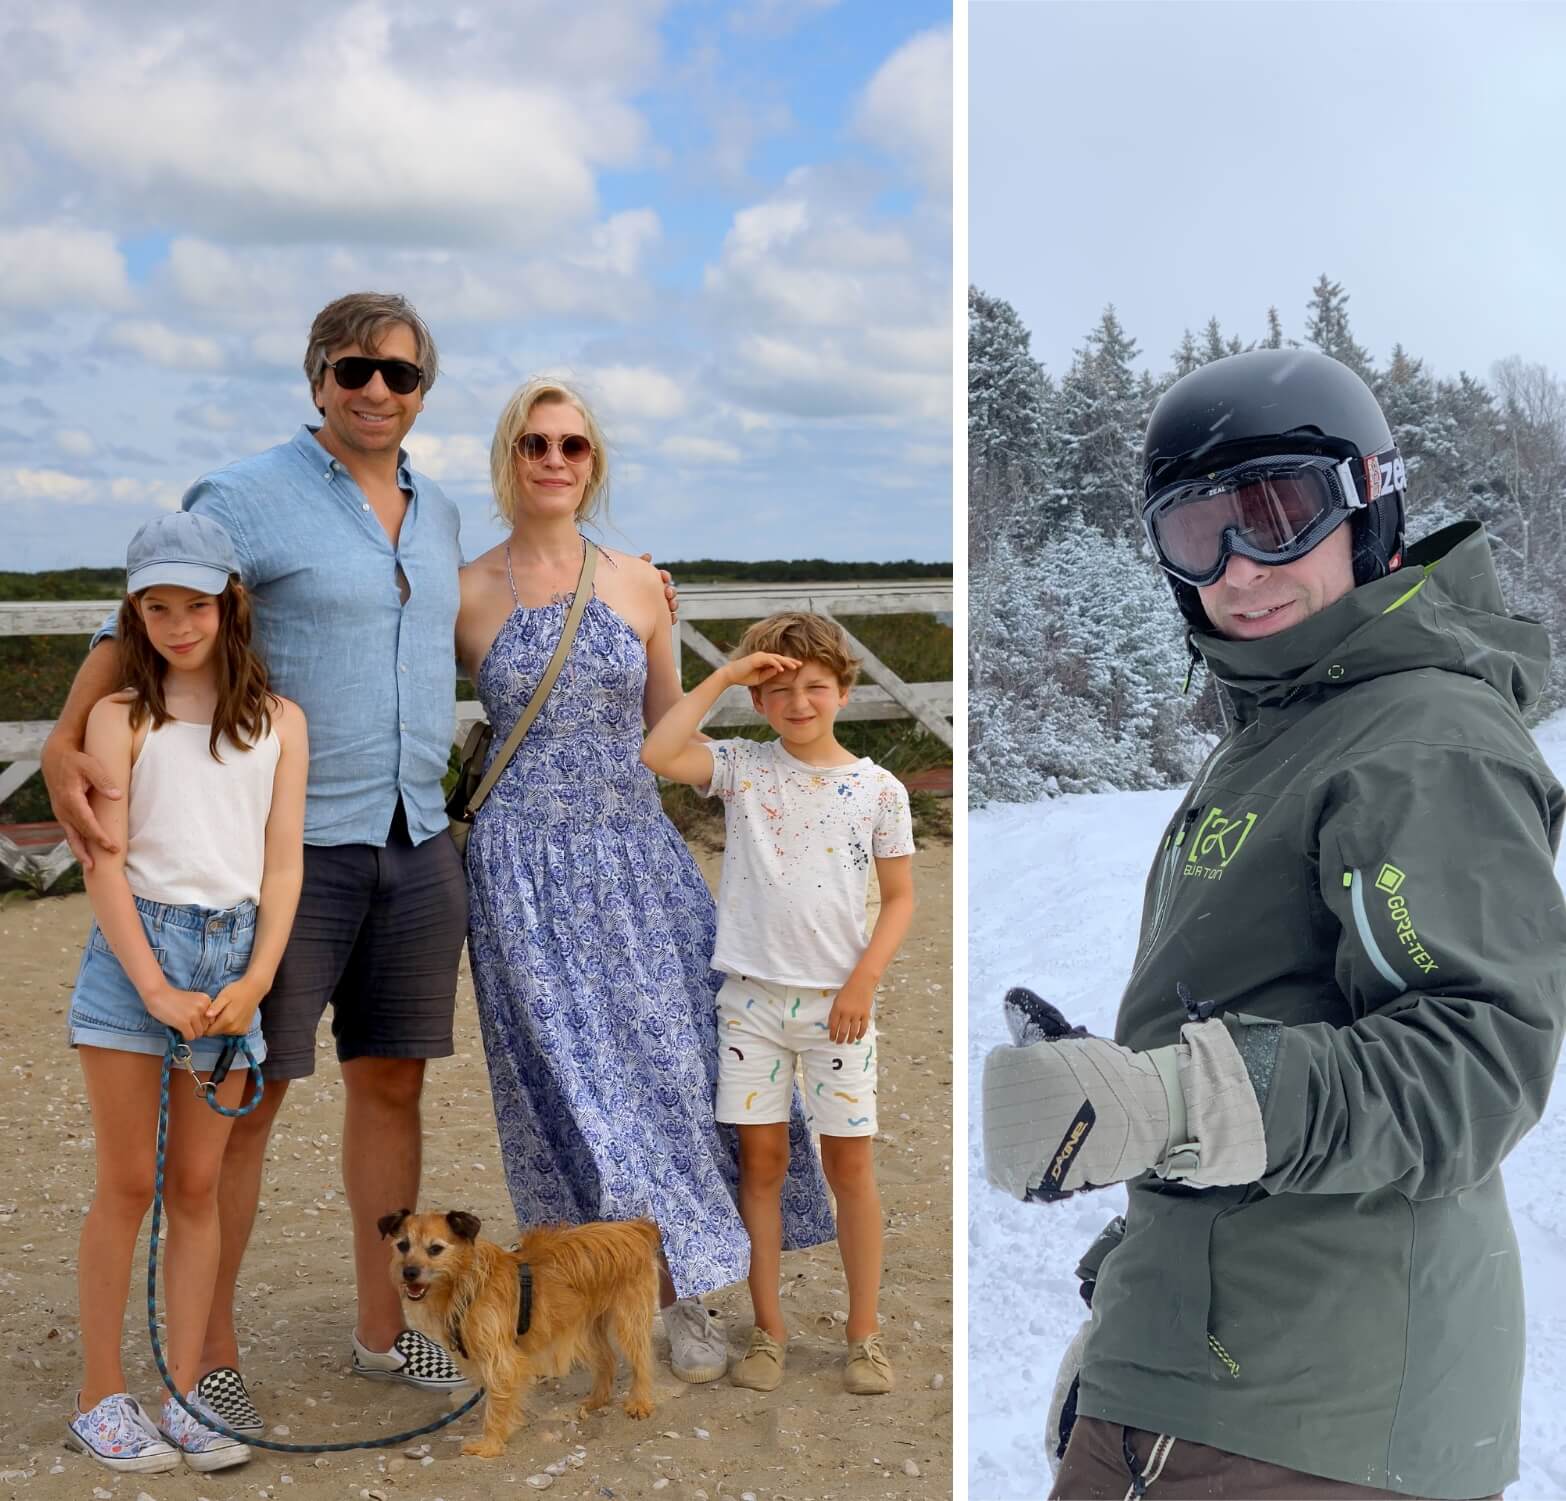 Collage of Doctor Page with his family on the beach and skiing